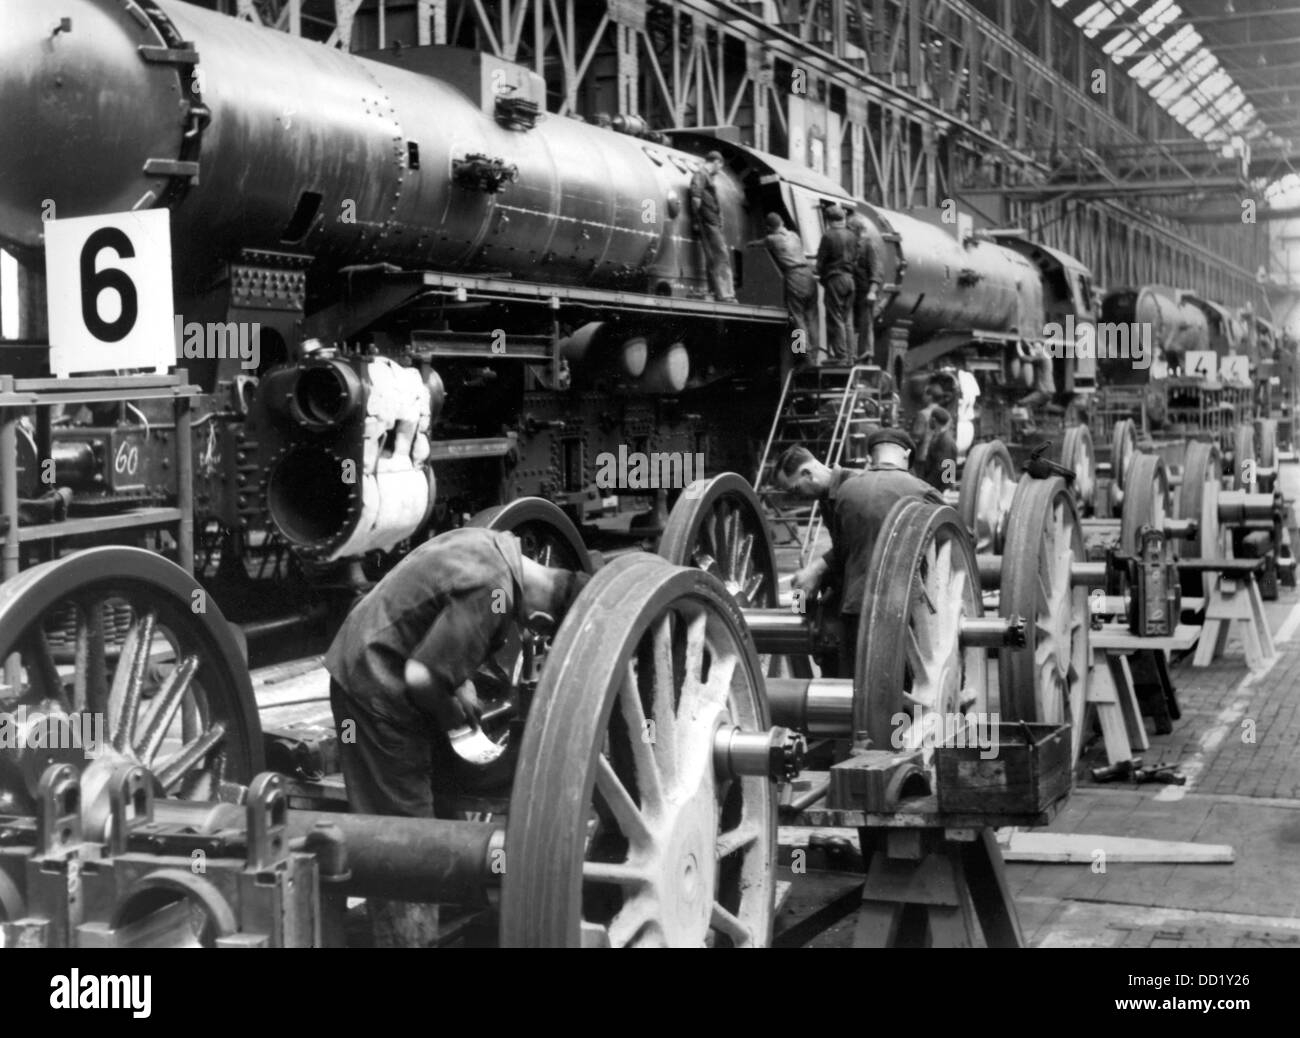 View of the production of a war locomotive series 52 at  the Berliner Maschinenbau AG in Wildau, Germany, in August 1943. The construction of a locomotive well-suited for the employment in war should ensure adequate supplying of the territories in the East occupied by the German Wehrmacht. Photo: Bildarchiv der Eisenbahnstiftung/RVM (minimum fee 60 euros) Stock Photo